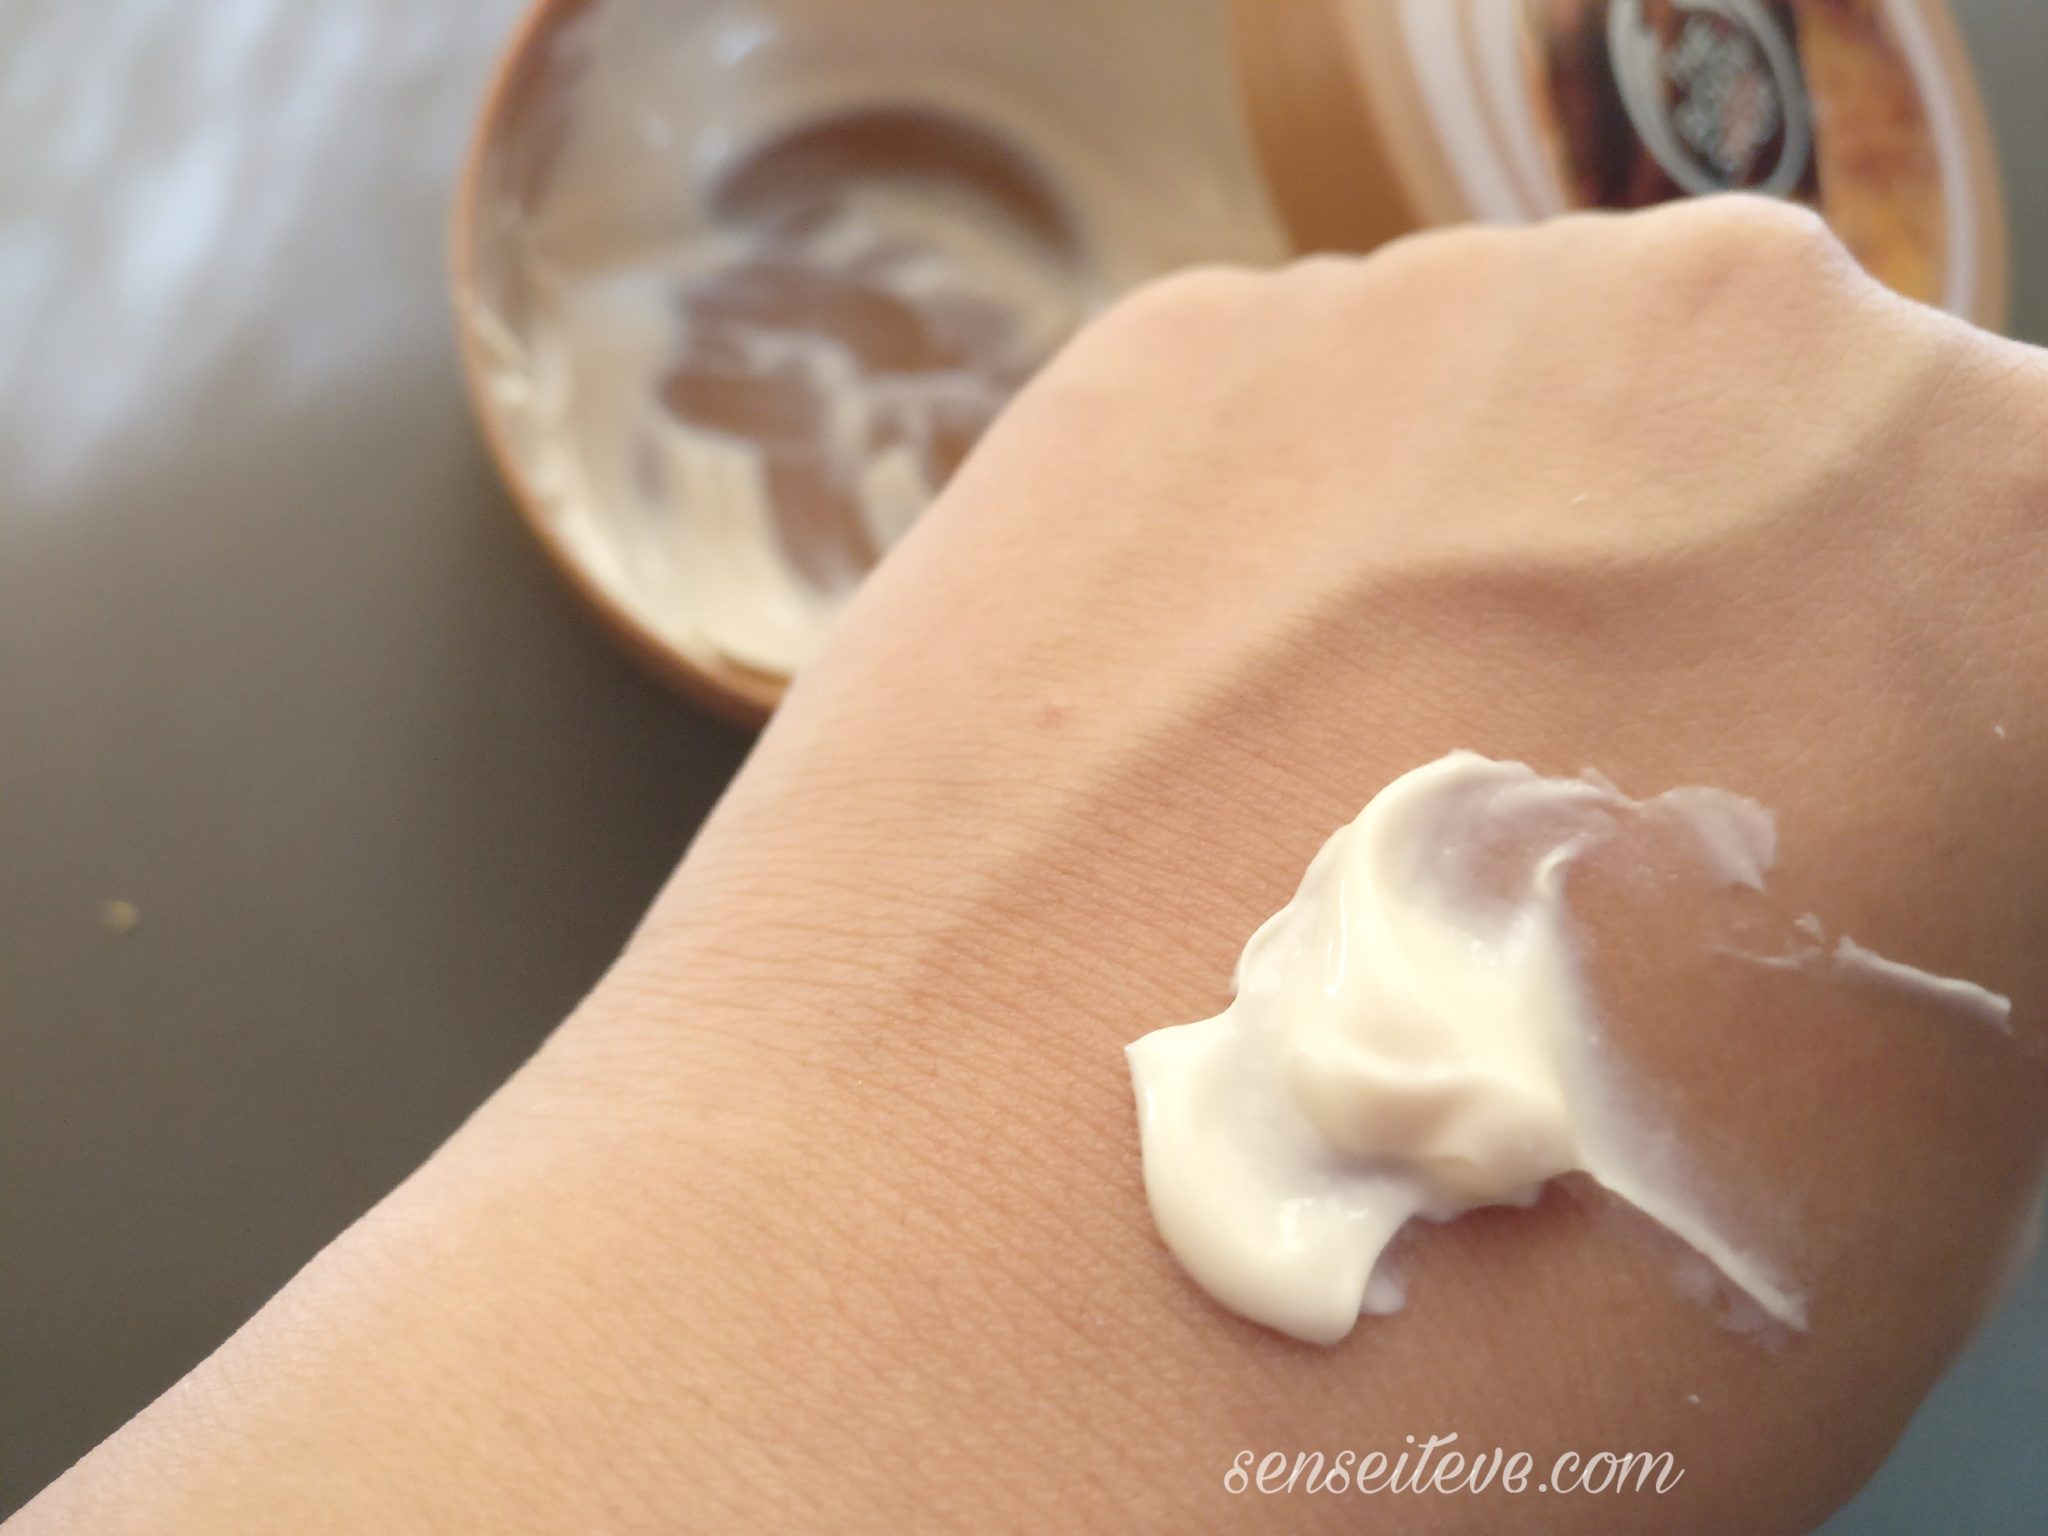 The Body Shop Cocoa Butter Body Butter Swatch Sense It Eve The Body Shop Cocoa Butter Body Butter Review